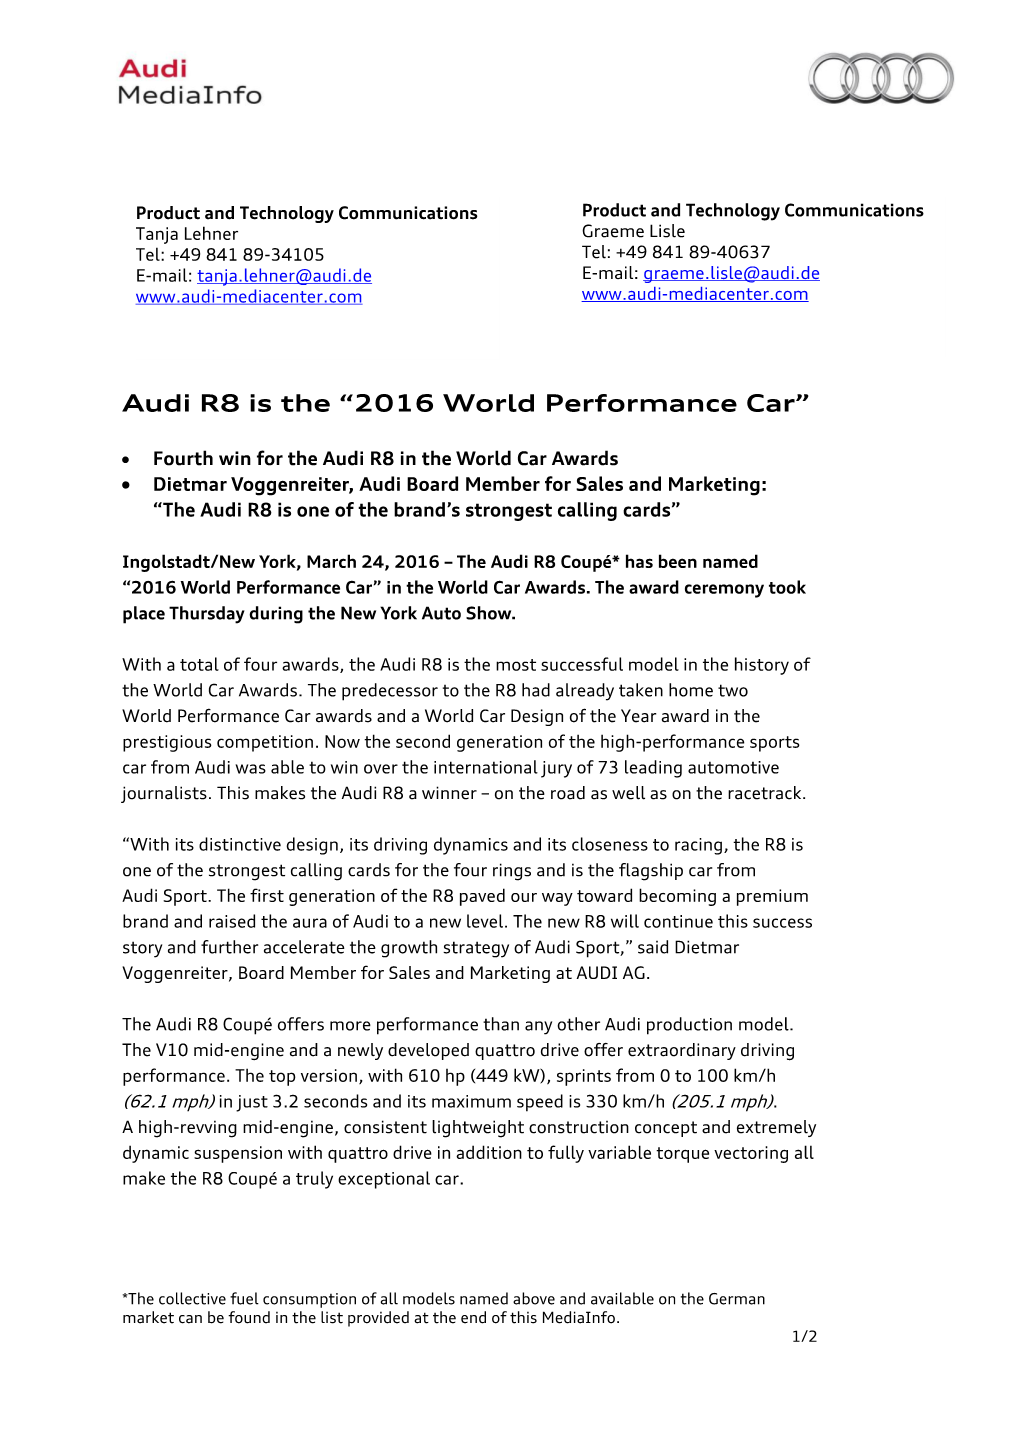 Audi R8 Is the “2016 World Performance Car”